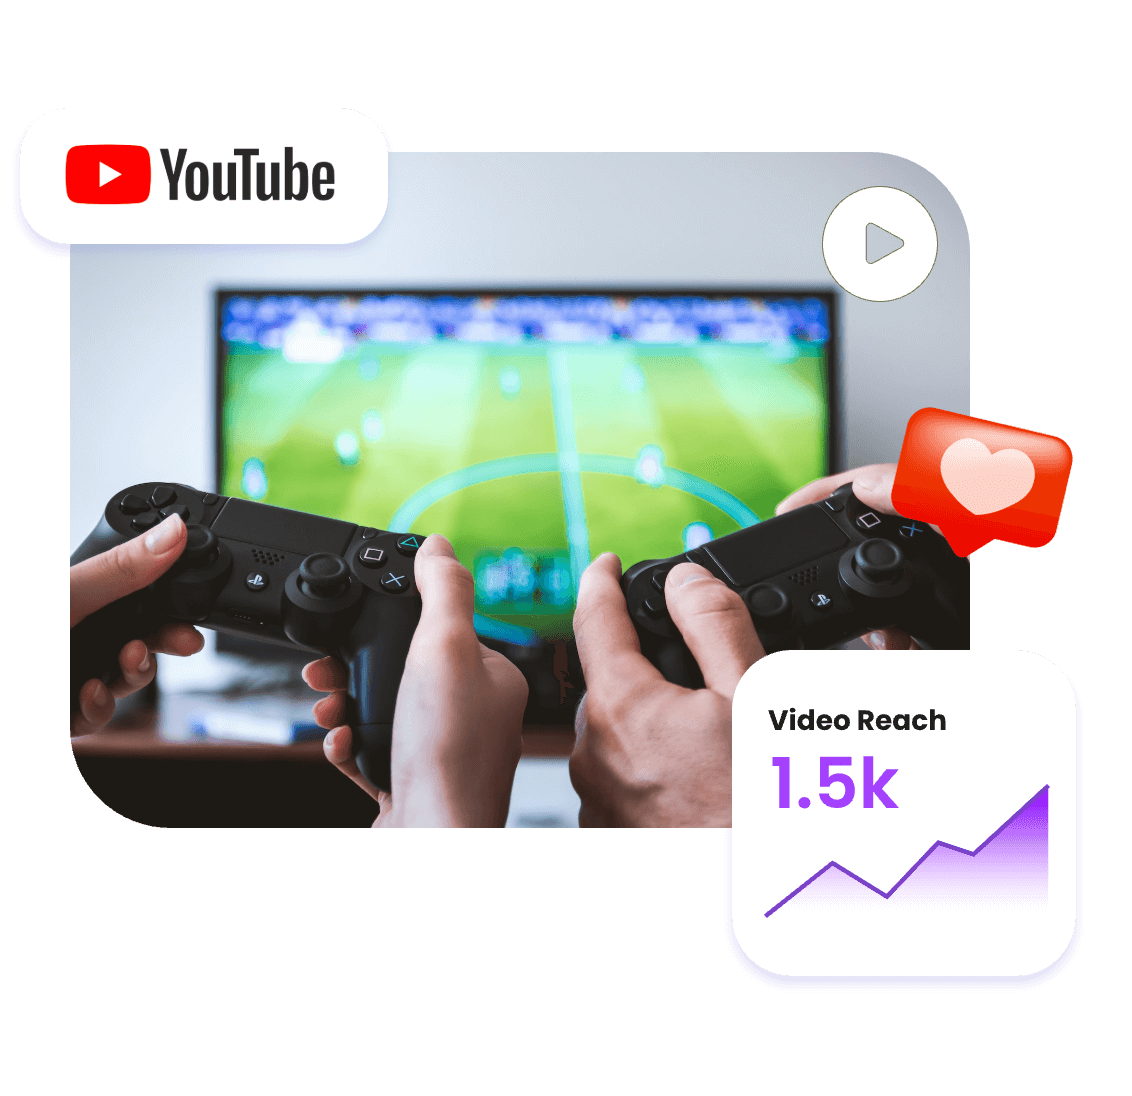 improve the engagement rate of a youtube channel with a video of playing soccer game